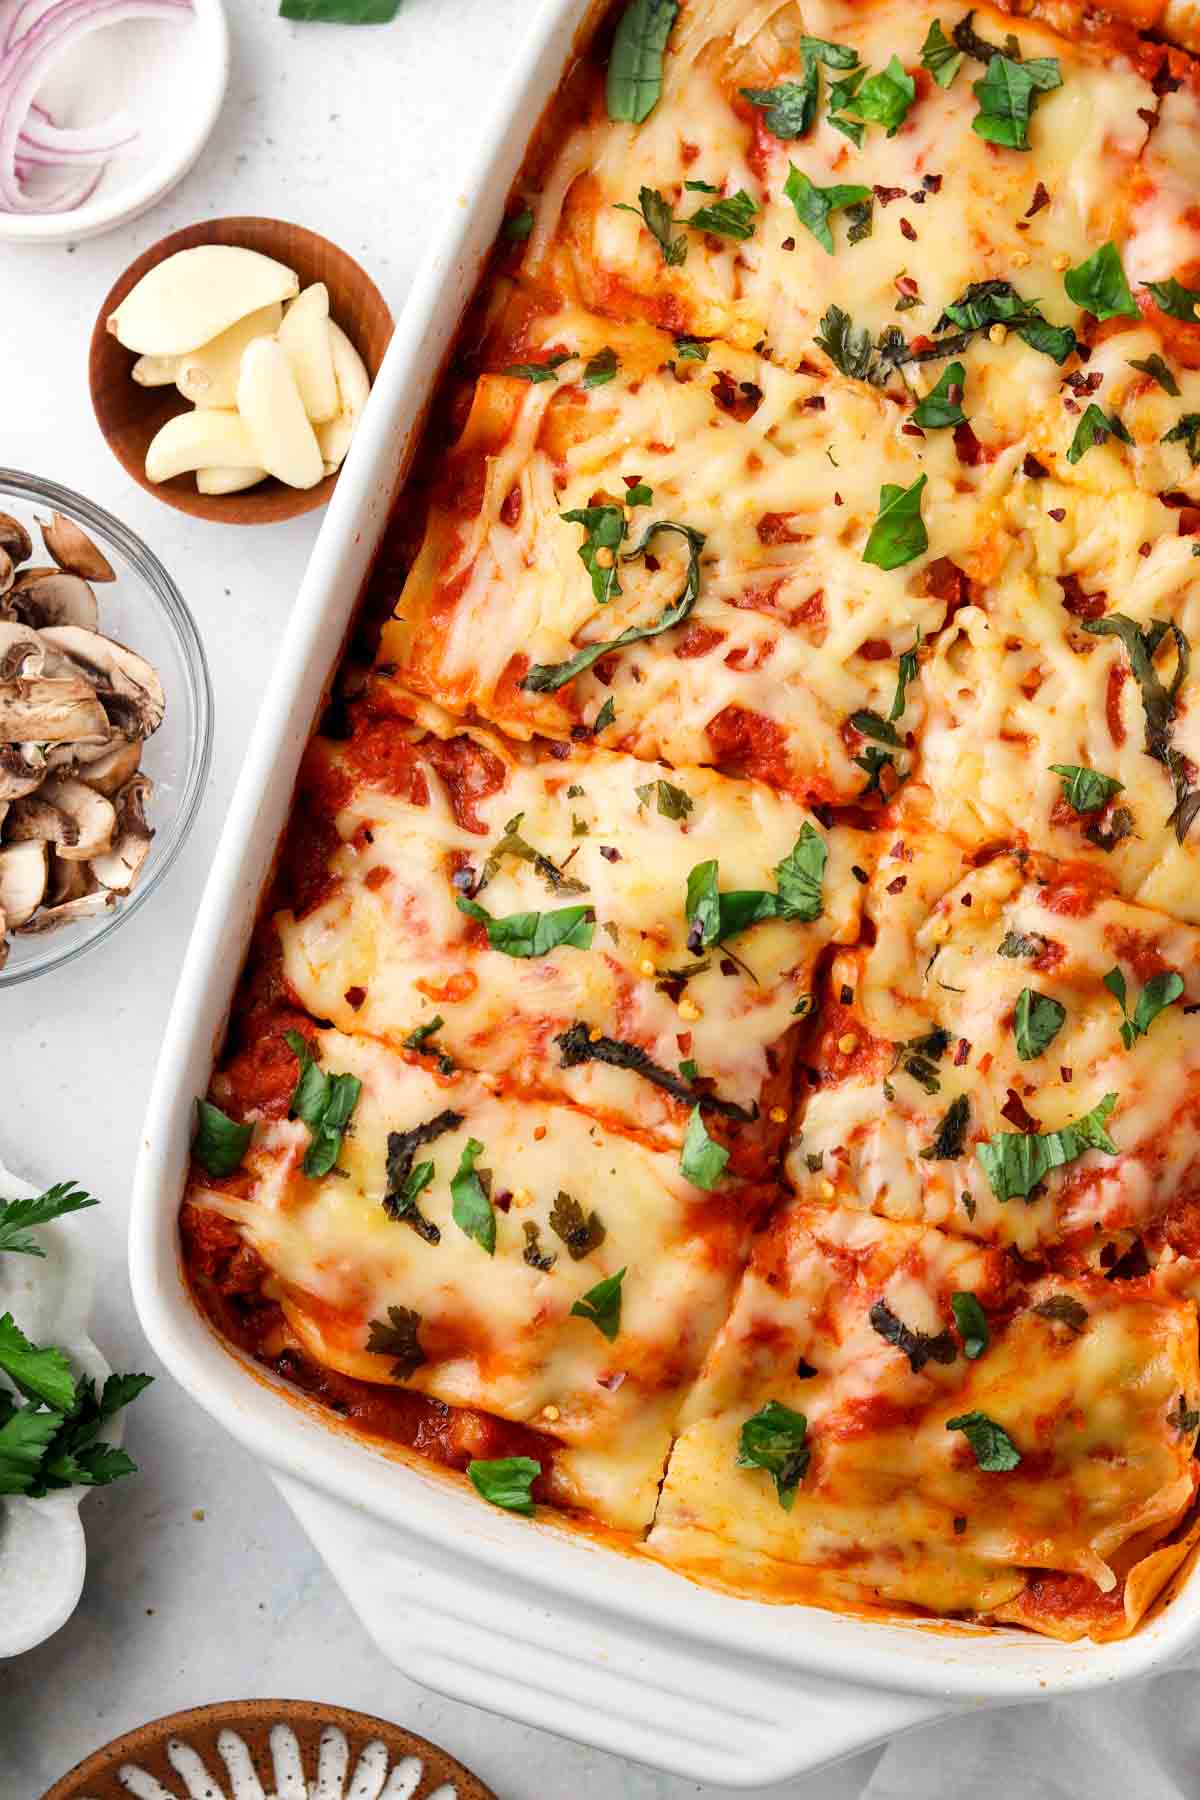 Lasagna with gluten free noodles and cashew cheese in a casserole dish.